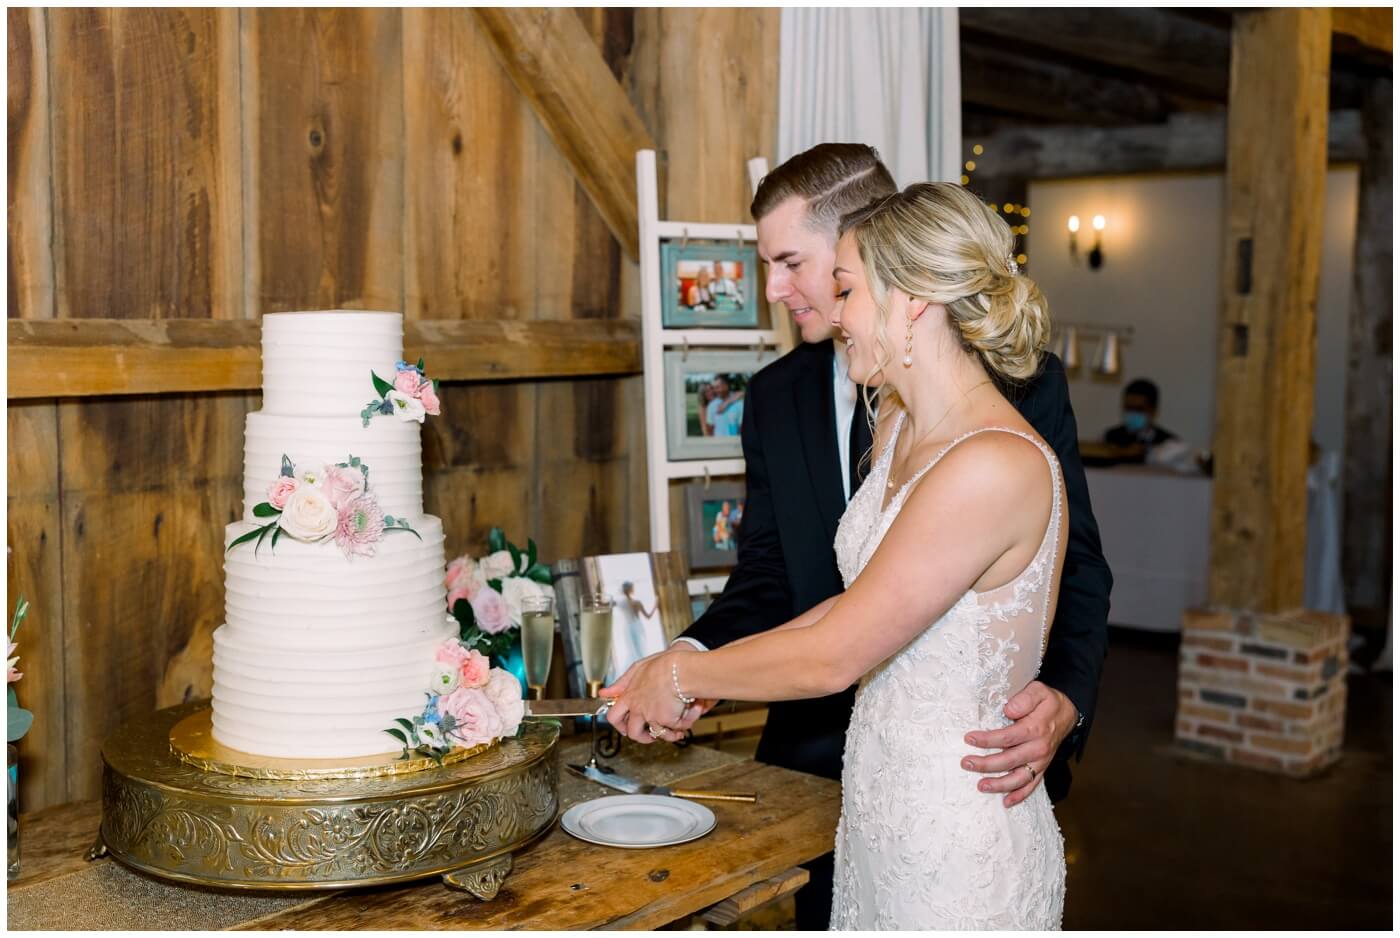 The couple cut their cake on their wedding day